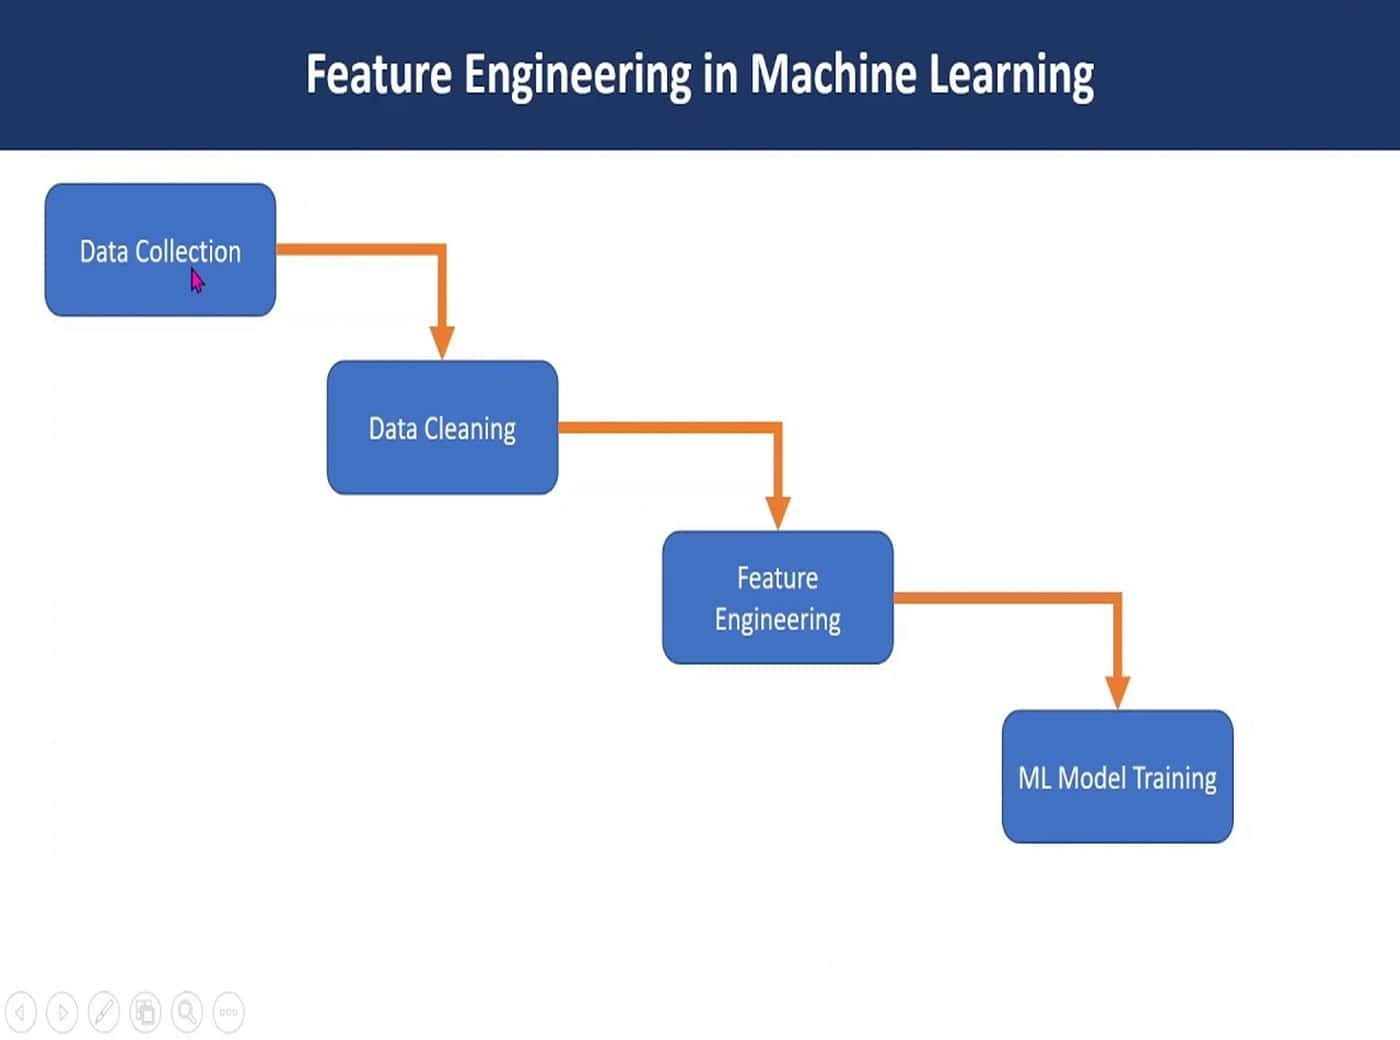 Feature Engineering in Machine Learning